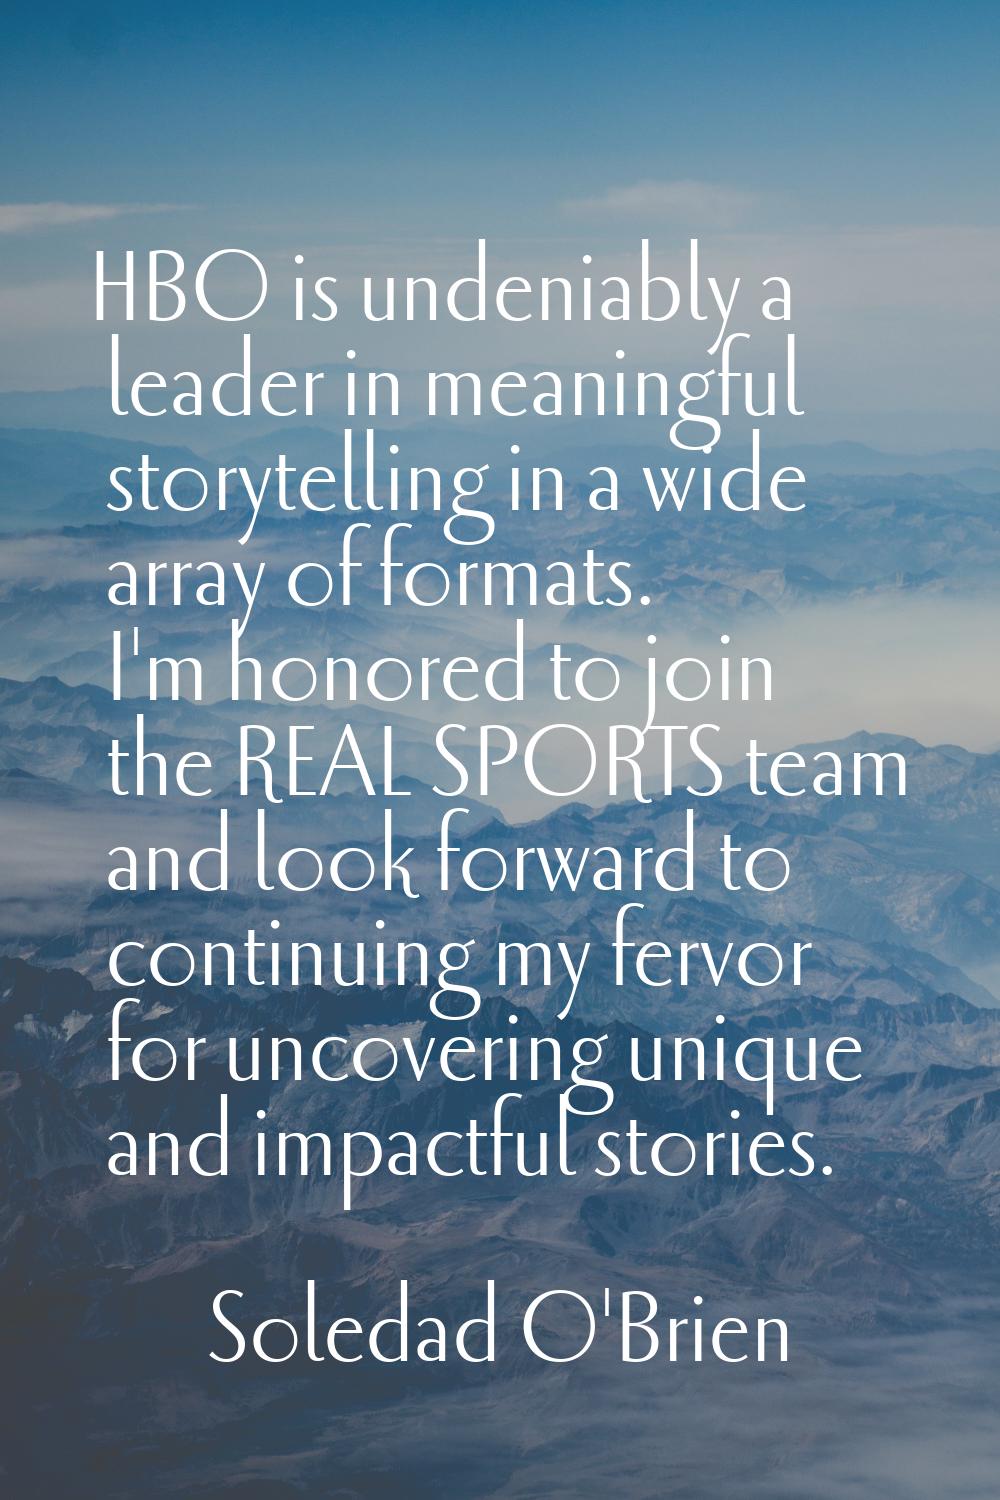 HBO is undeniably a leader in meaningful storytelling in a wide array of formats. I'm honored to jo